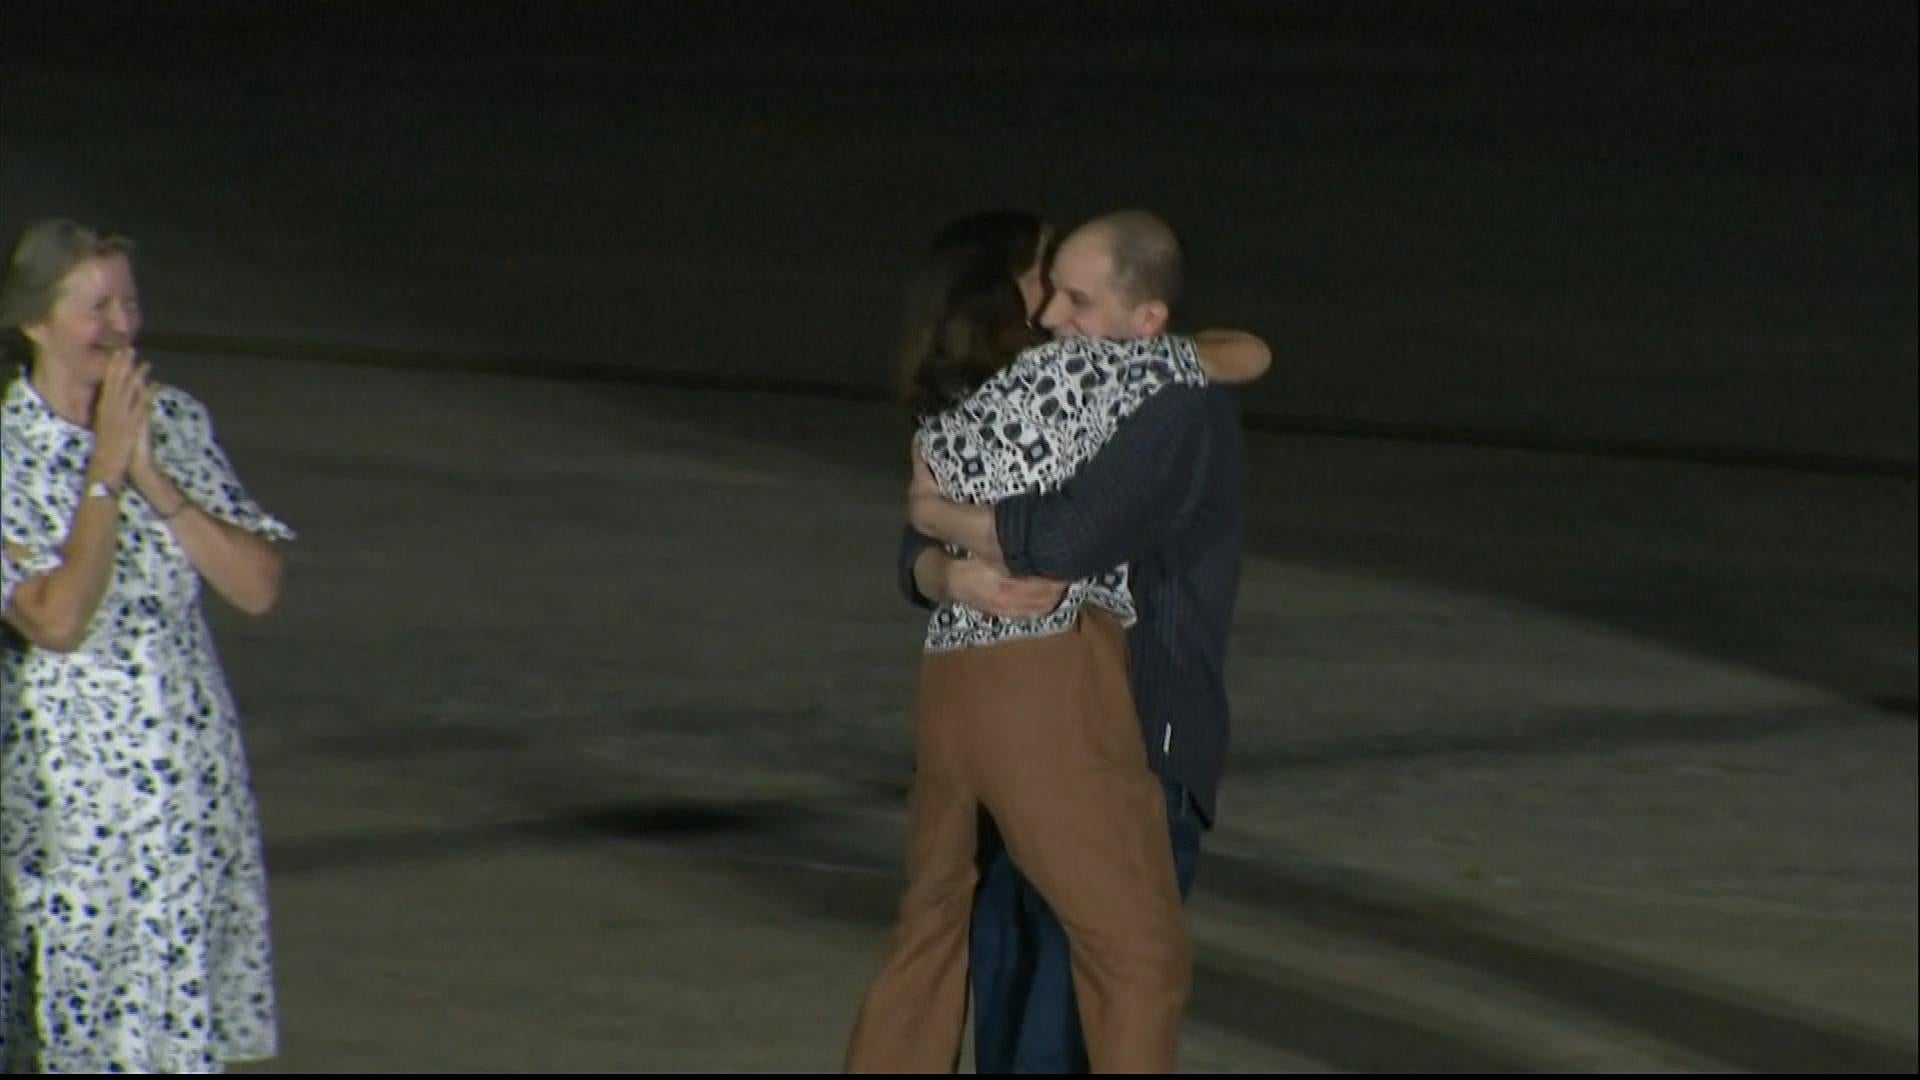 Americans Freed in Prisoner Swap Reunite With Their Families